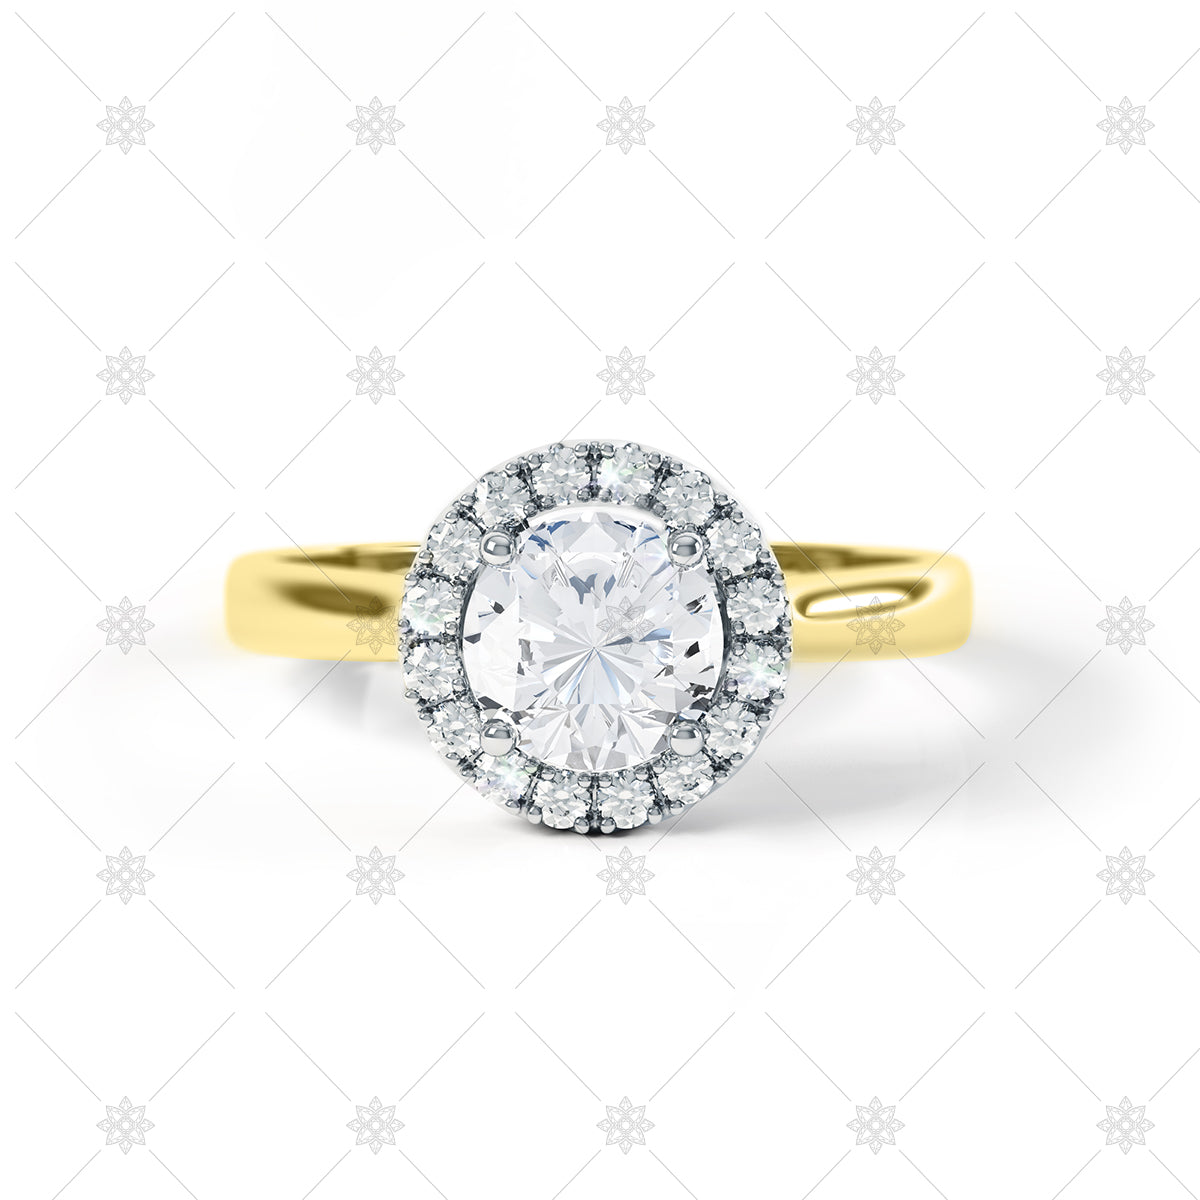 Diamond Halo Ring Image in Yellow Gold